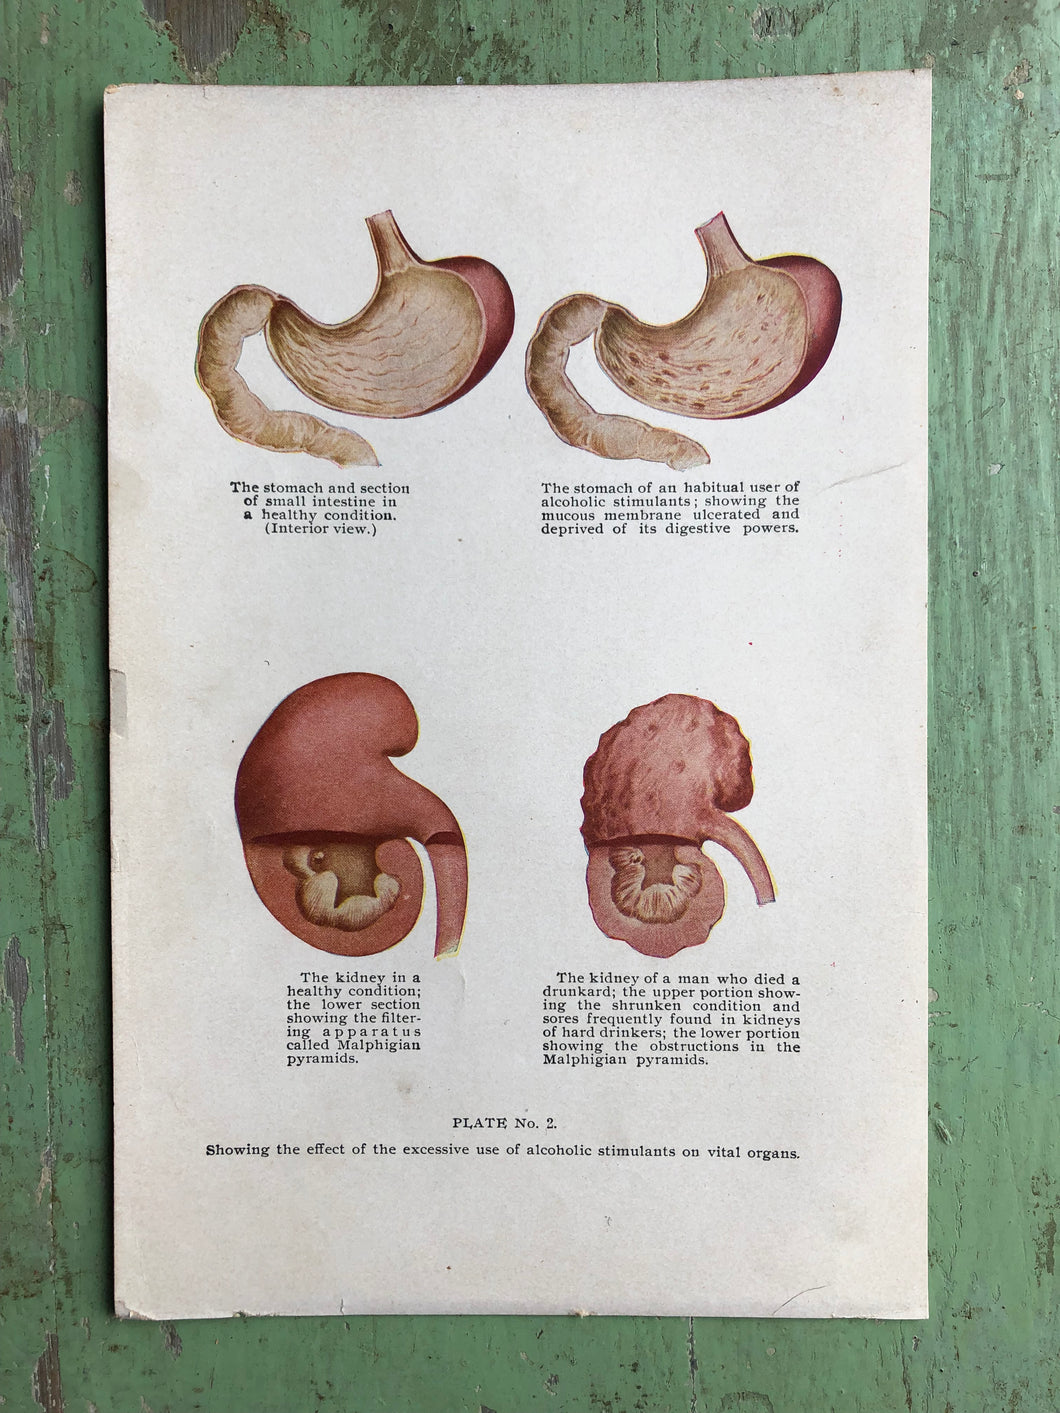 Effects of excessive use of alcohol on the kidneys and stomach. Print from 